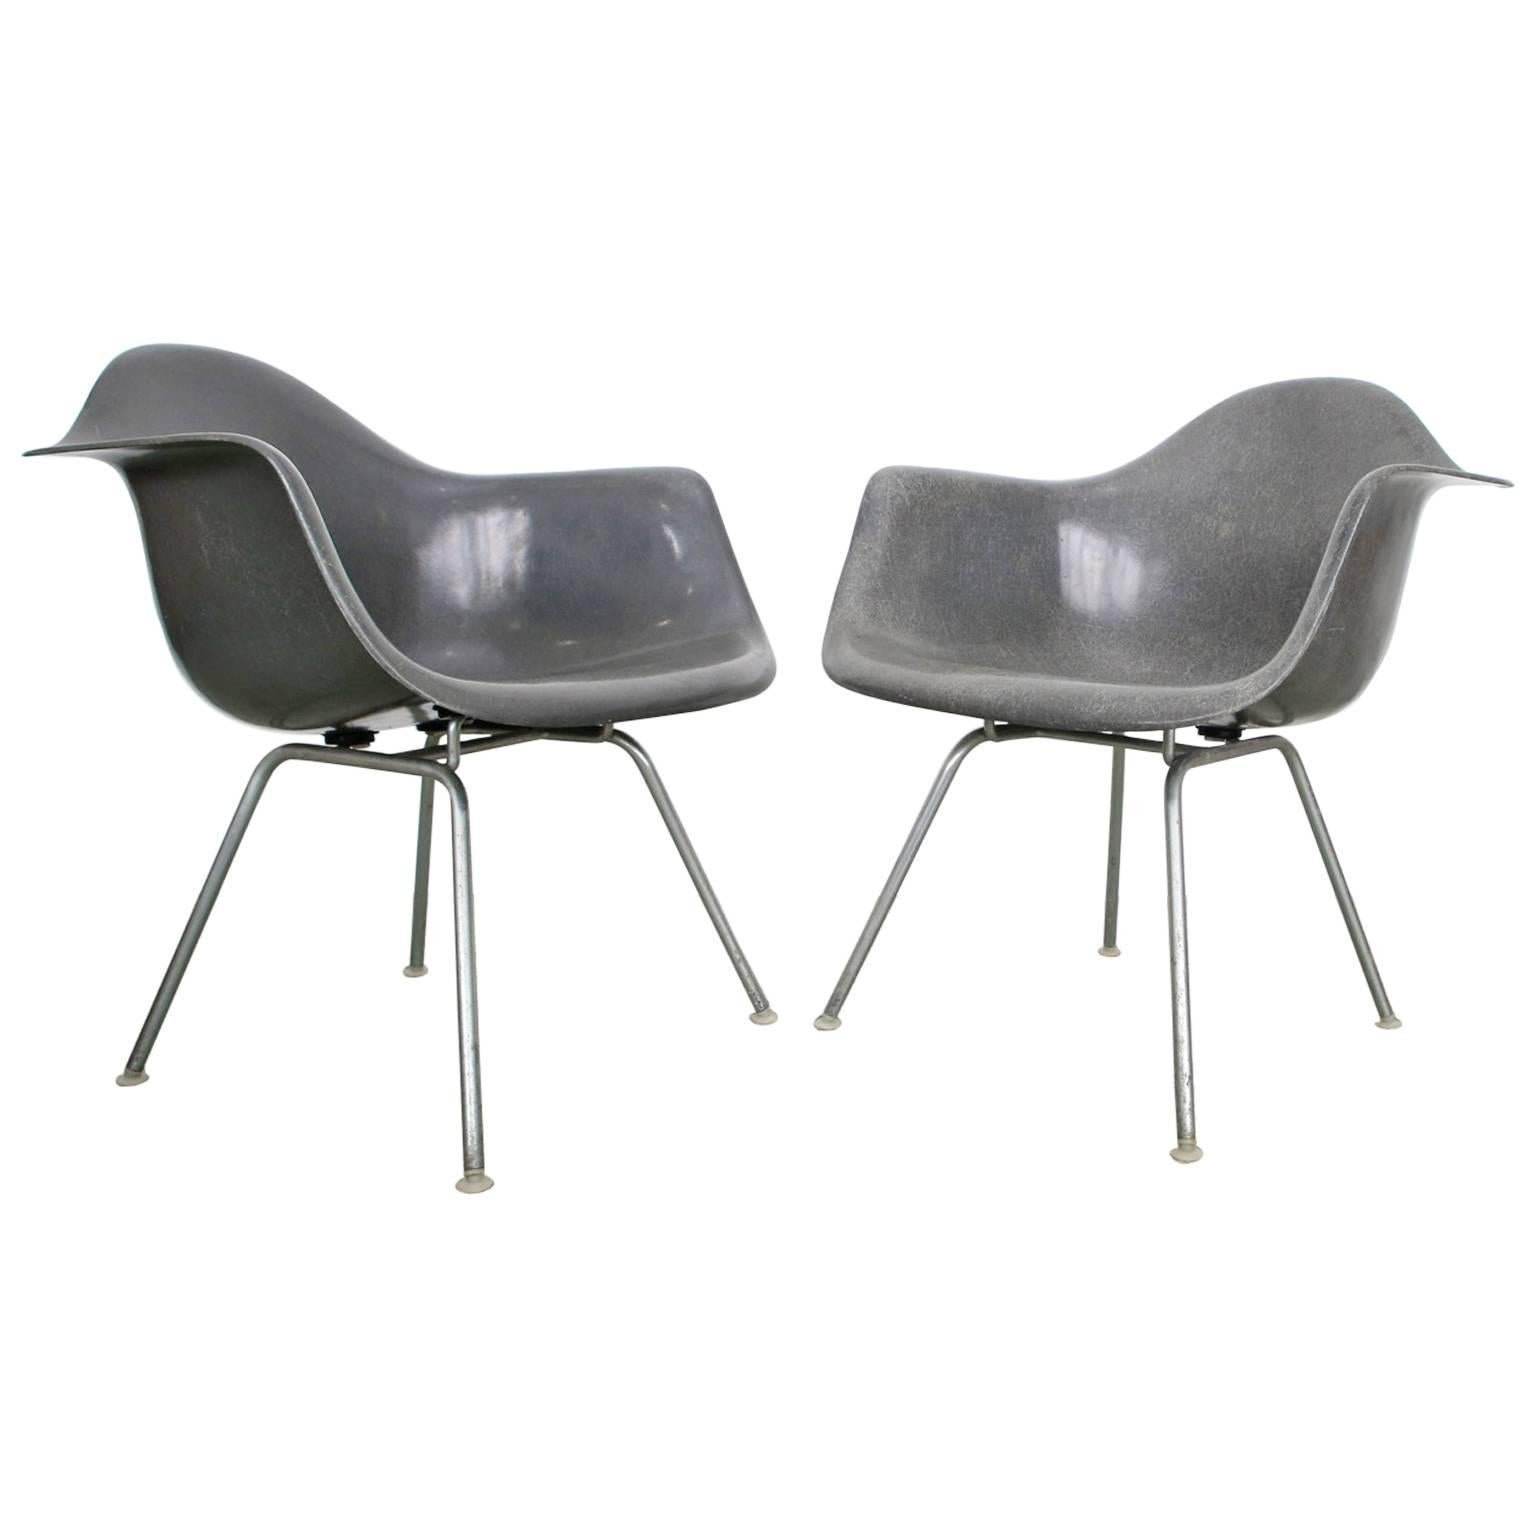 Pair of Elephant Grey Eames Armchairs